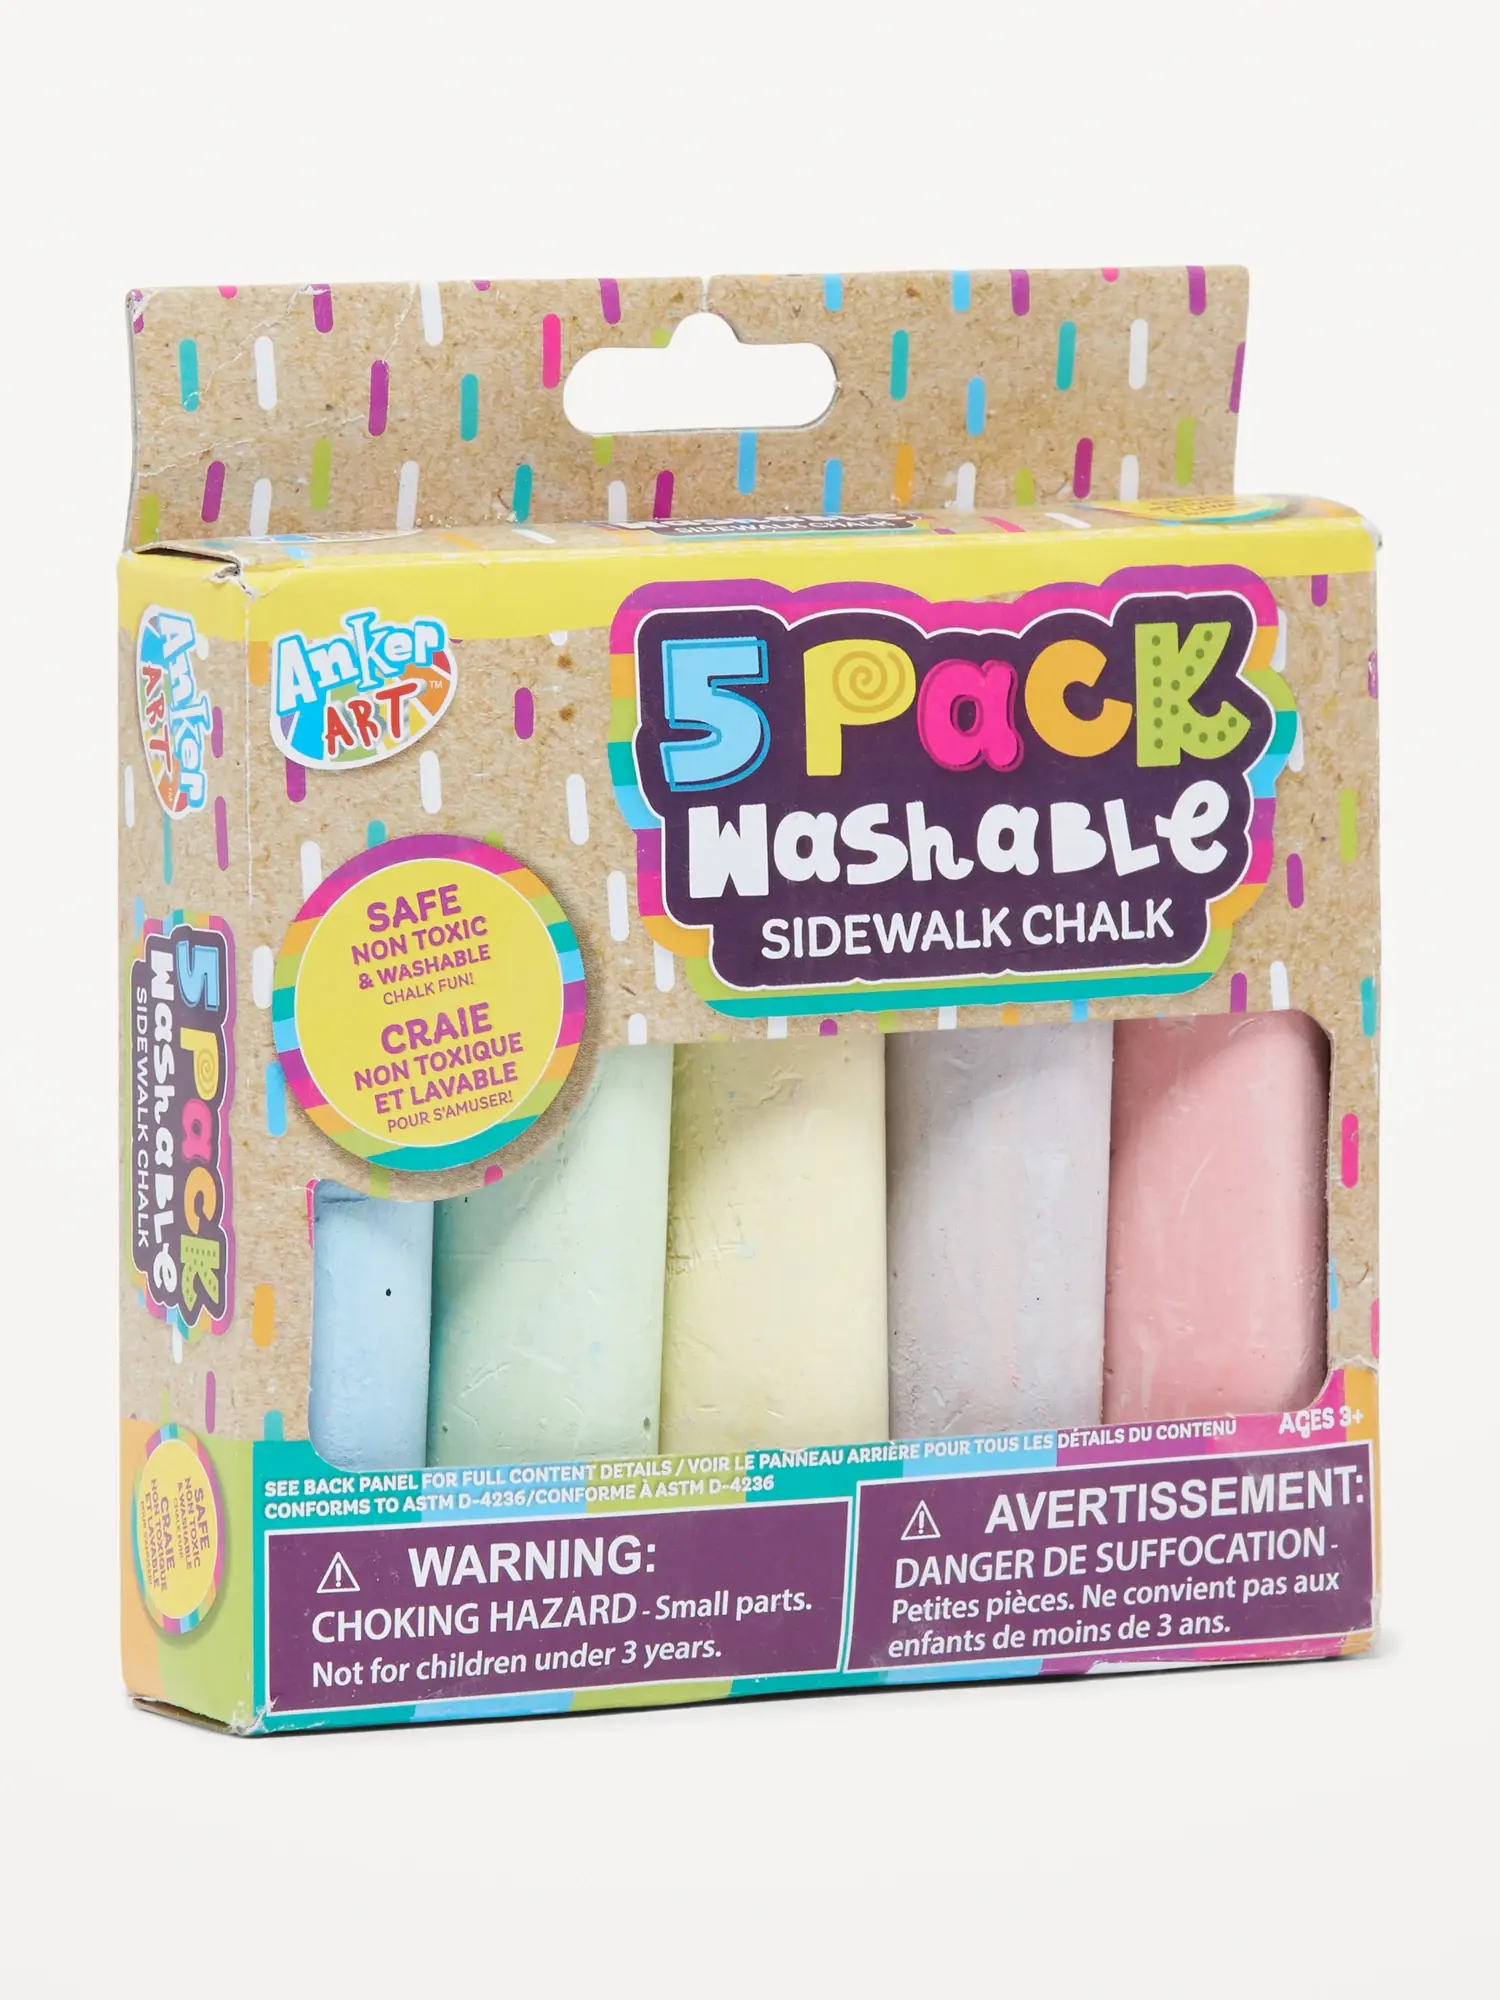 Old Navy Anker Play 5 Piece Washable Sidewalk Chalk for Kids multi. 1